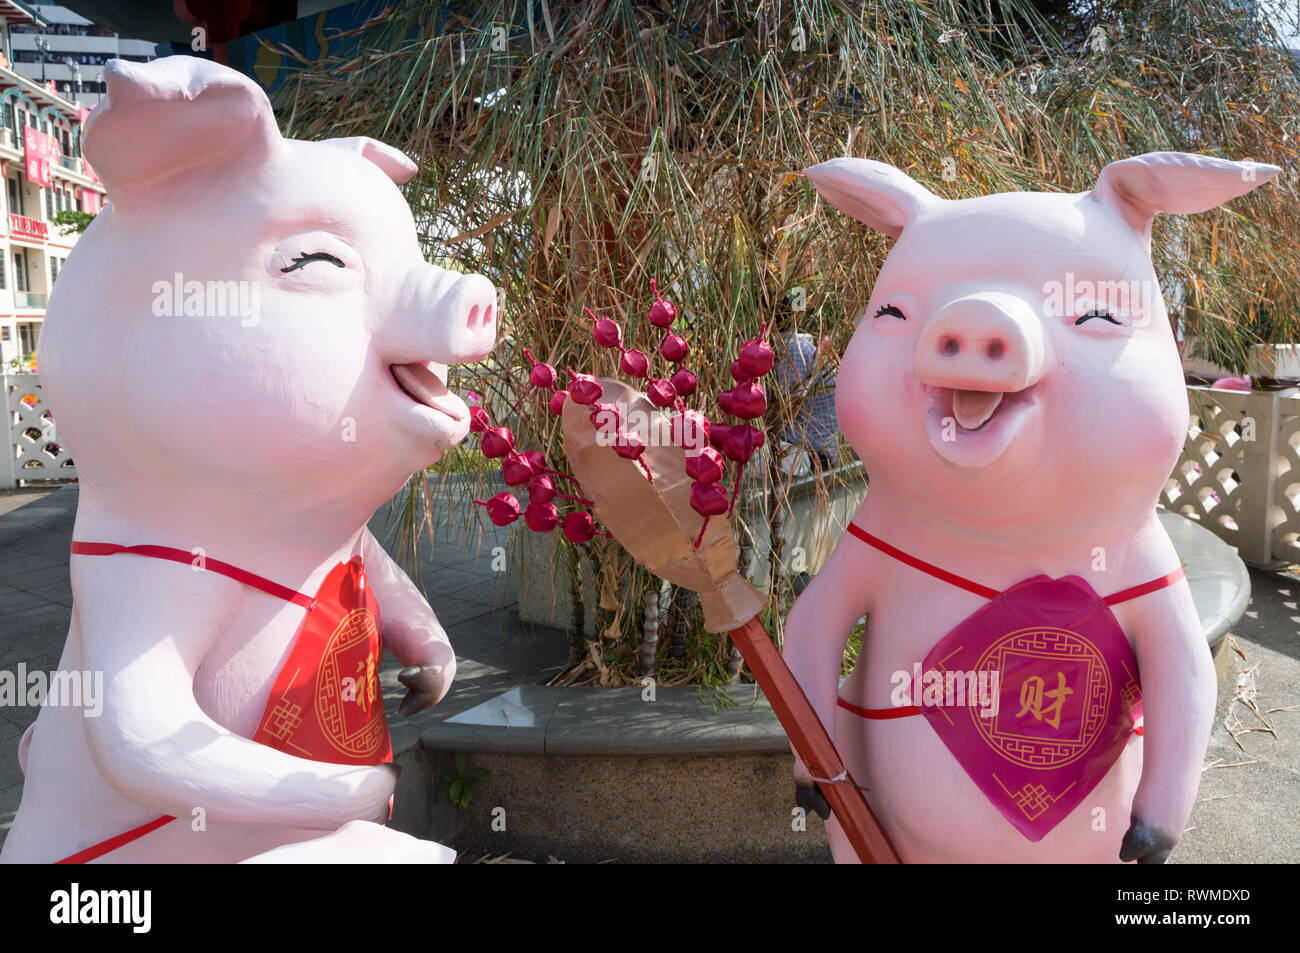 Large model pigs, Chinatown, Singapore, during the Chinese New Year 2019 Stock Photo